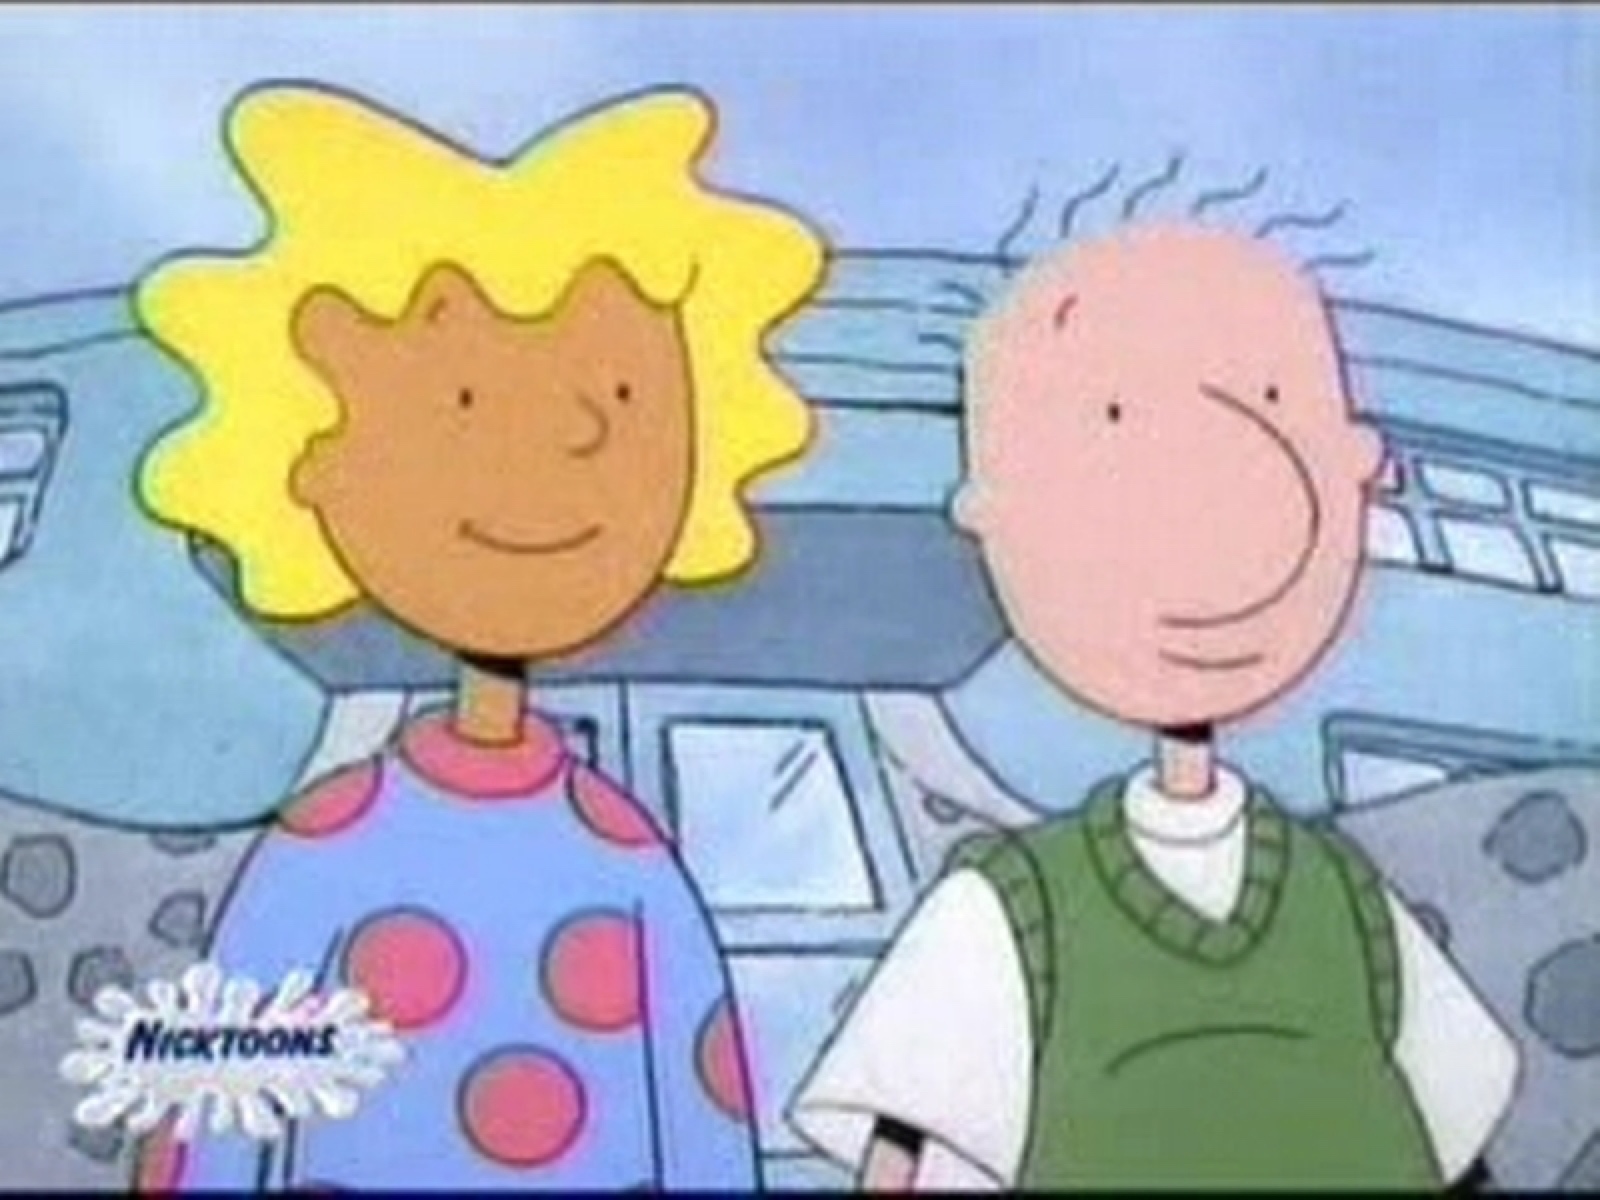 Find Out What Happened To Doug And Patti Mayonnaise In The 'Doug'...